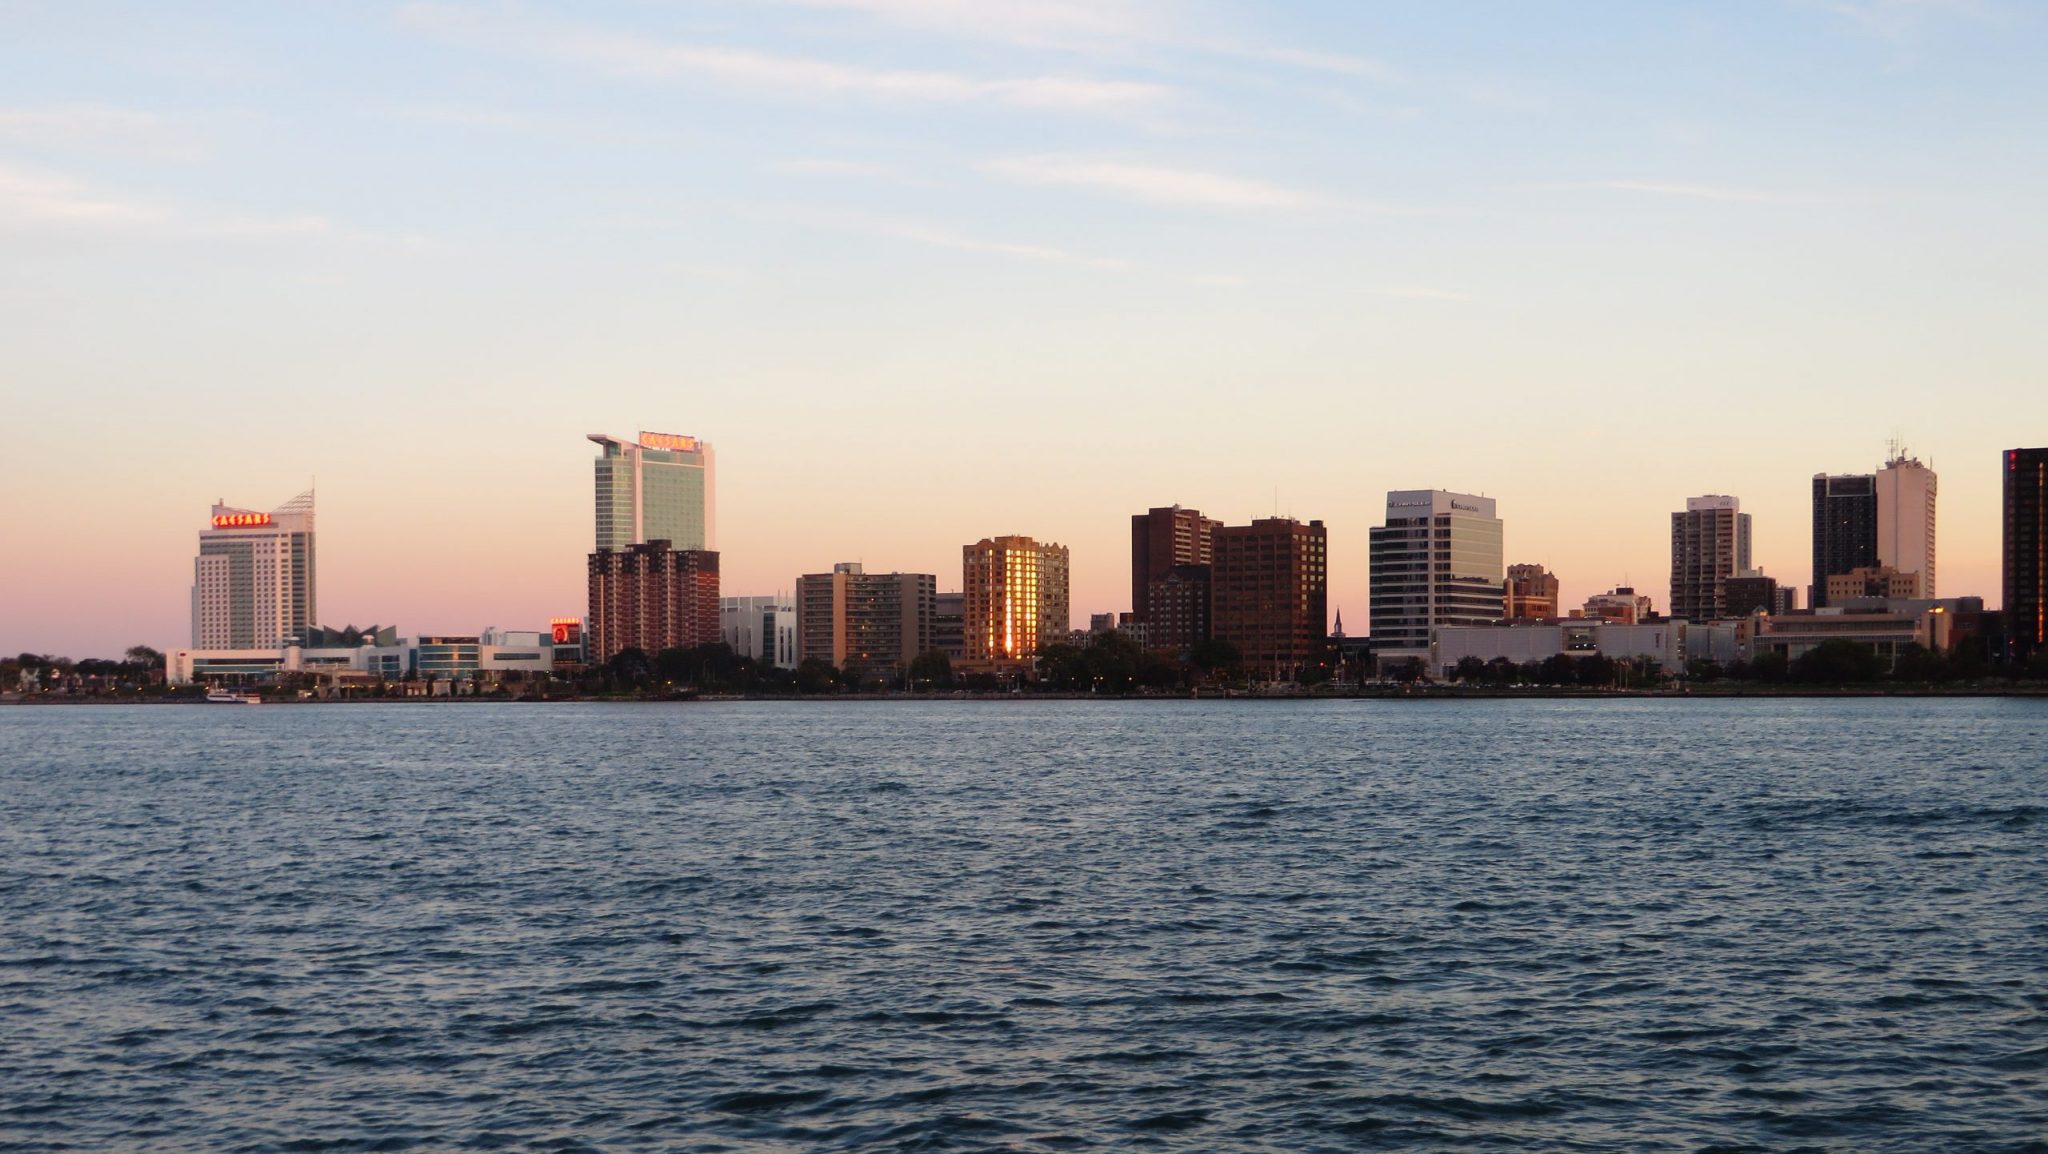 A view of the Windsor, Ontario skyline.